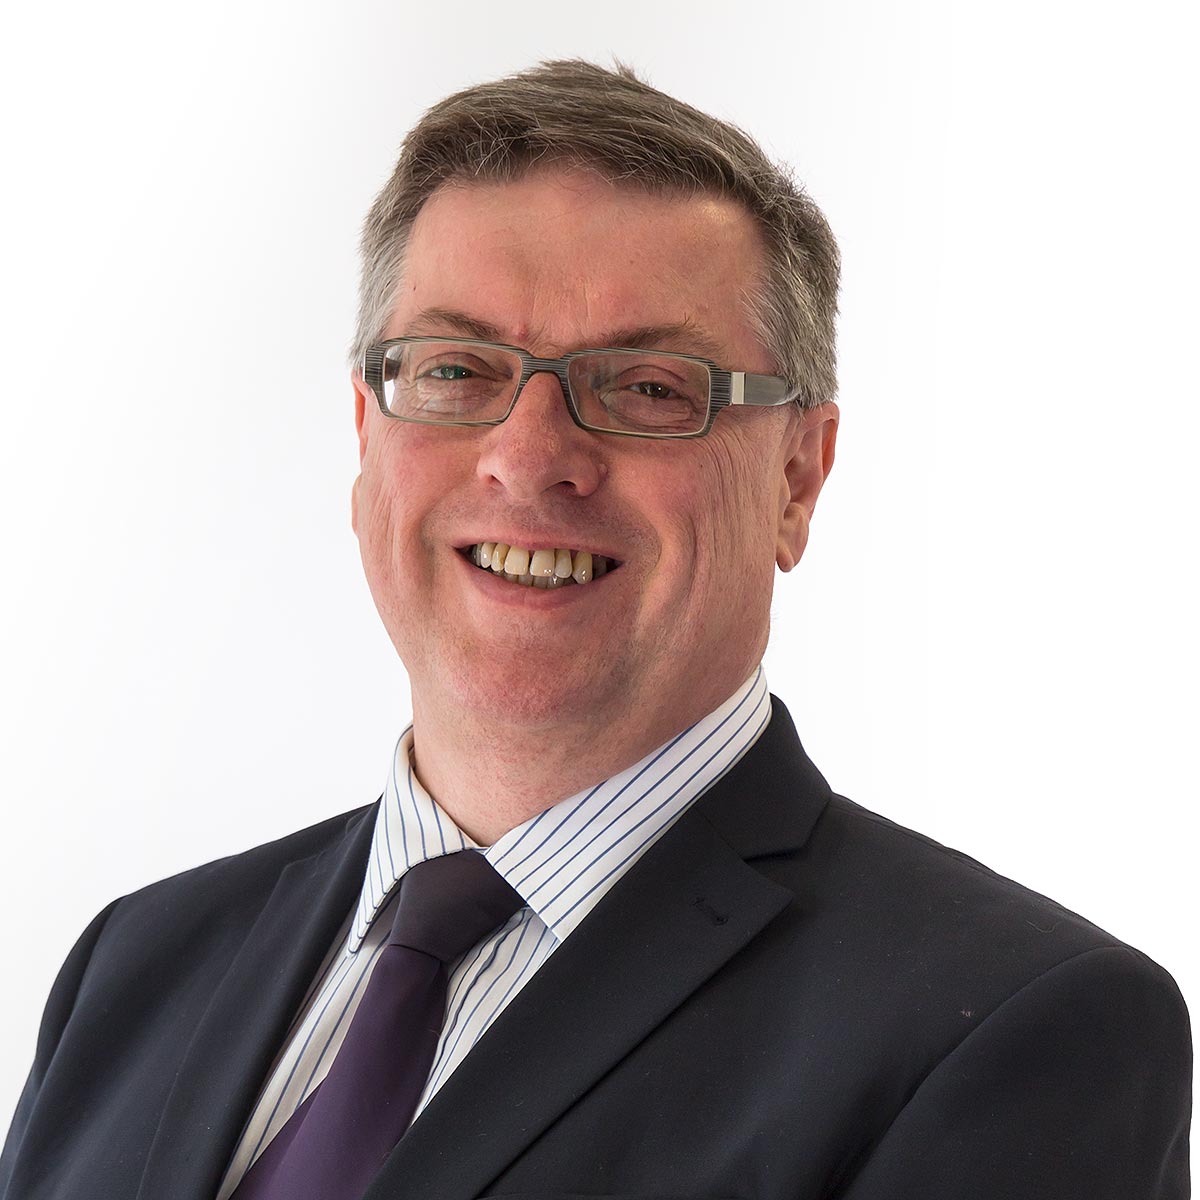 Paul Rolfe, Director of Paul Rolfe Sales and Letting